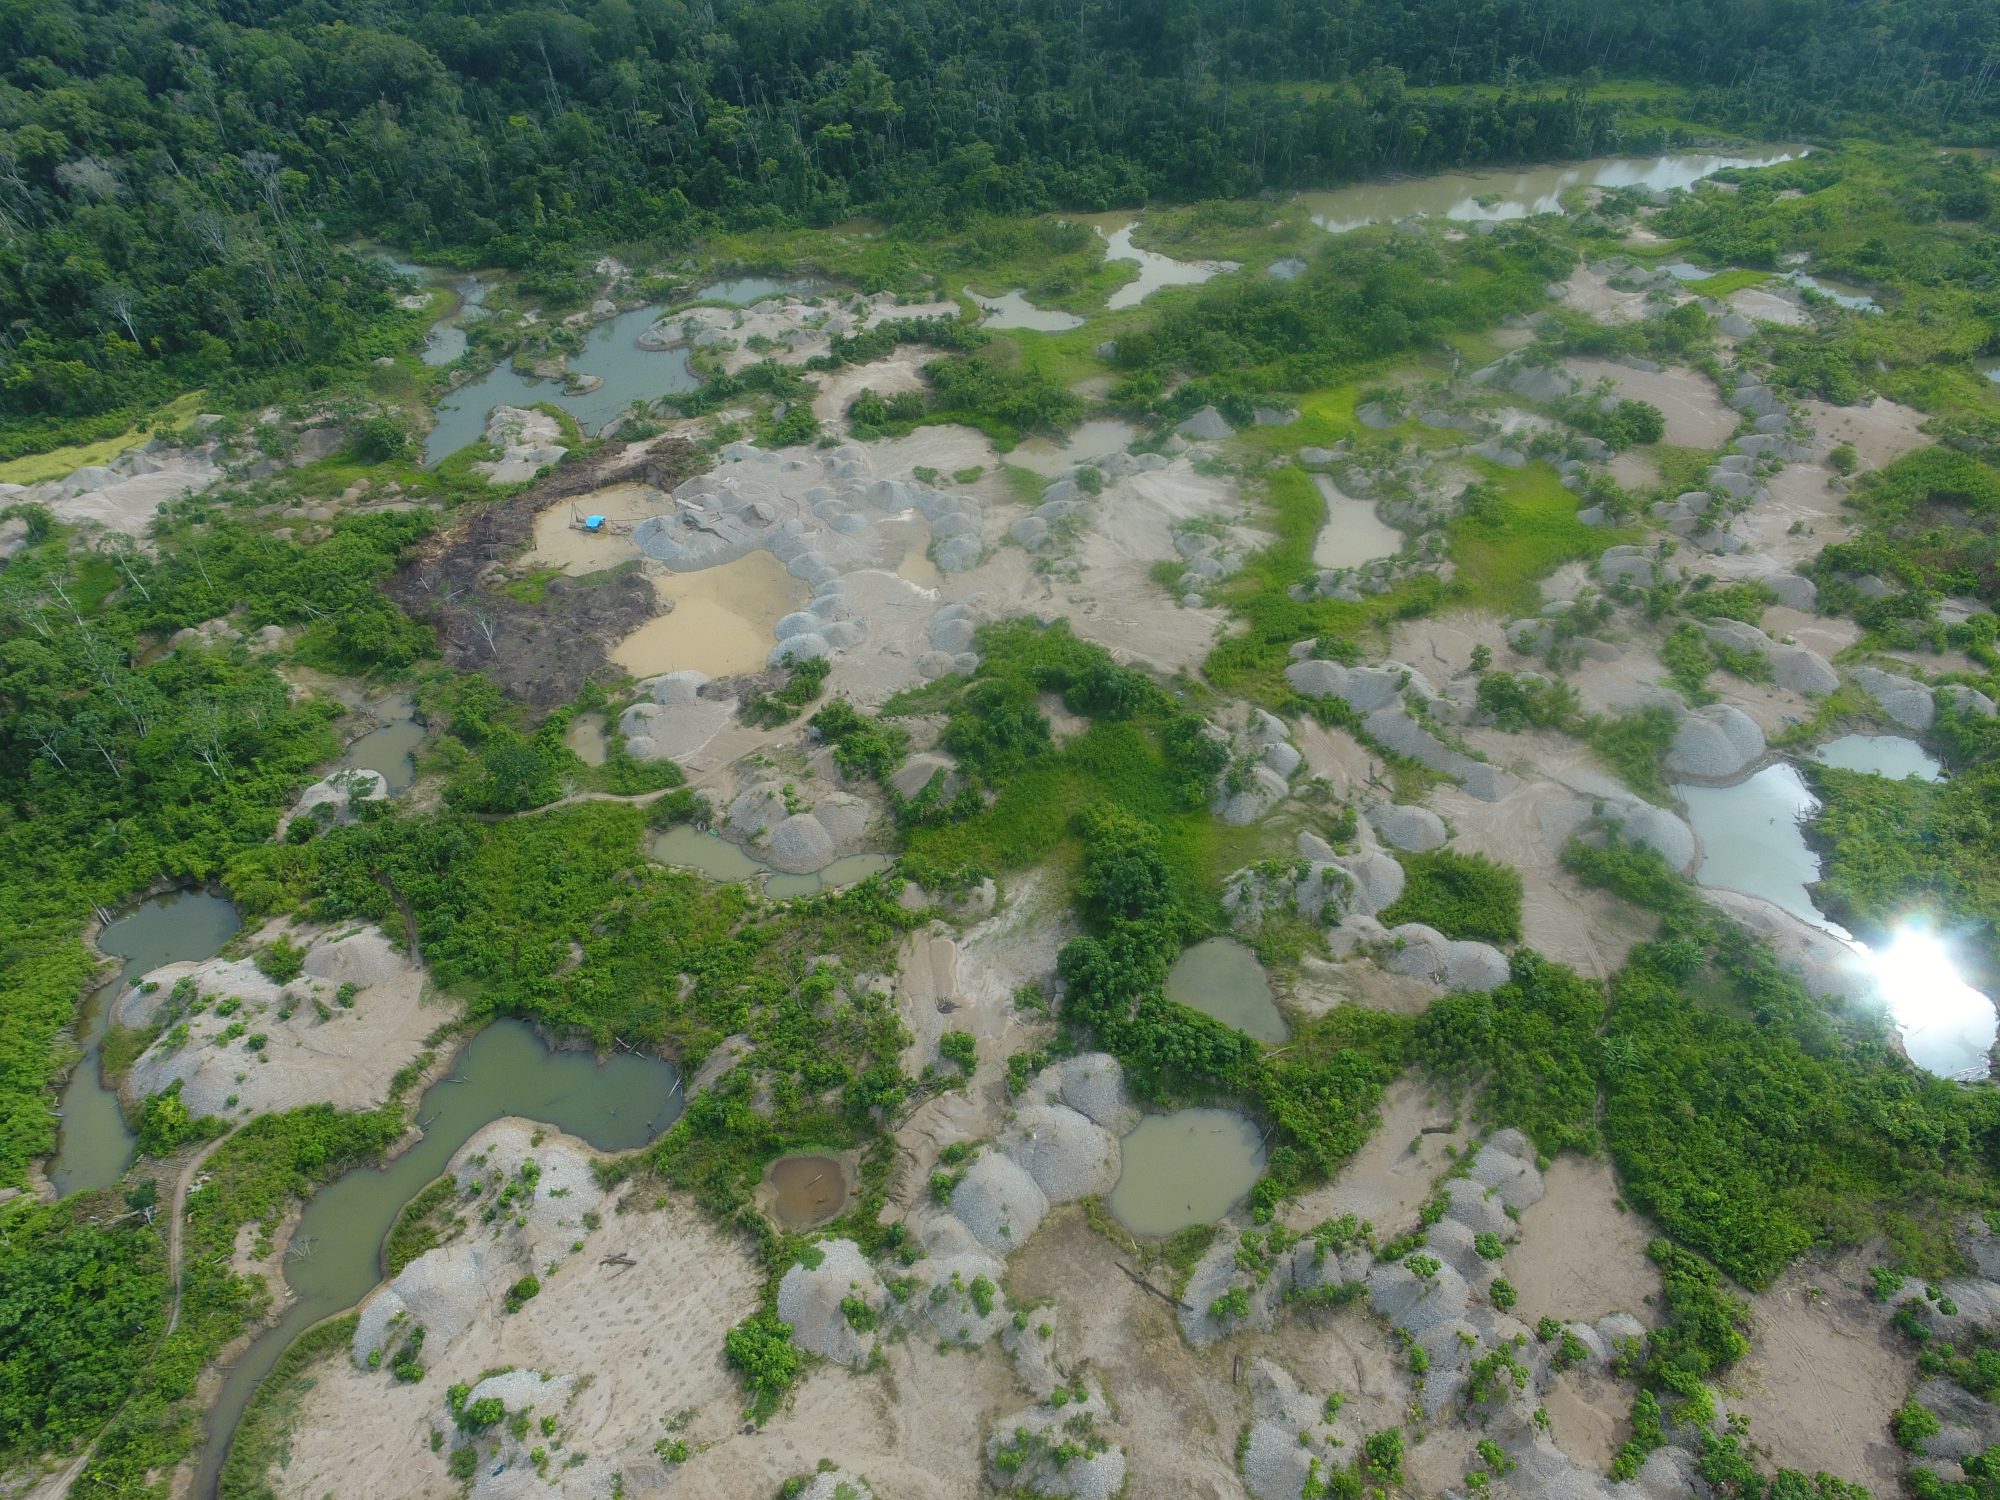 The damage from gold mining is clearly visible in the rainforest. Previously lush greenery is now scattered with barren craters.